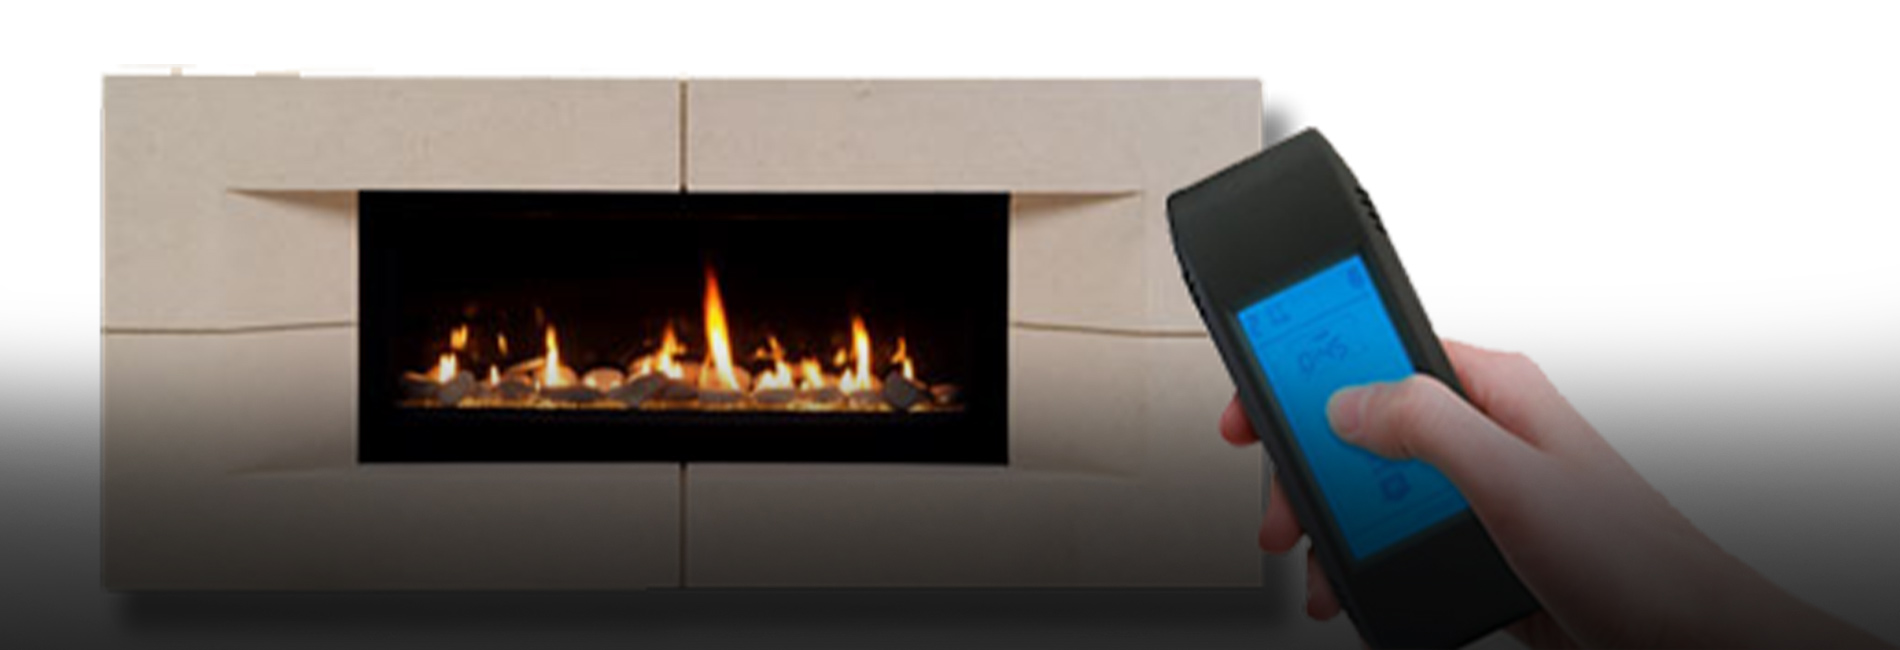 Ambient Fireplace Remote Controls